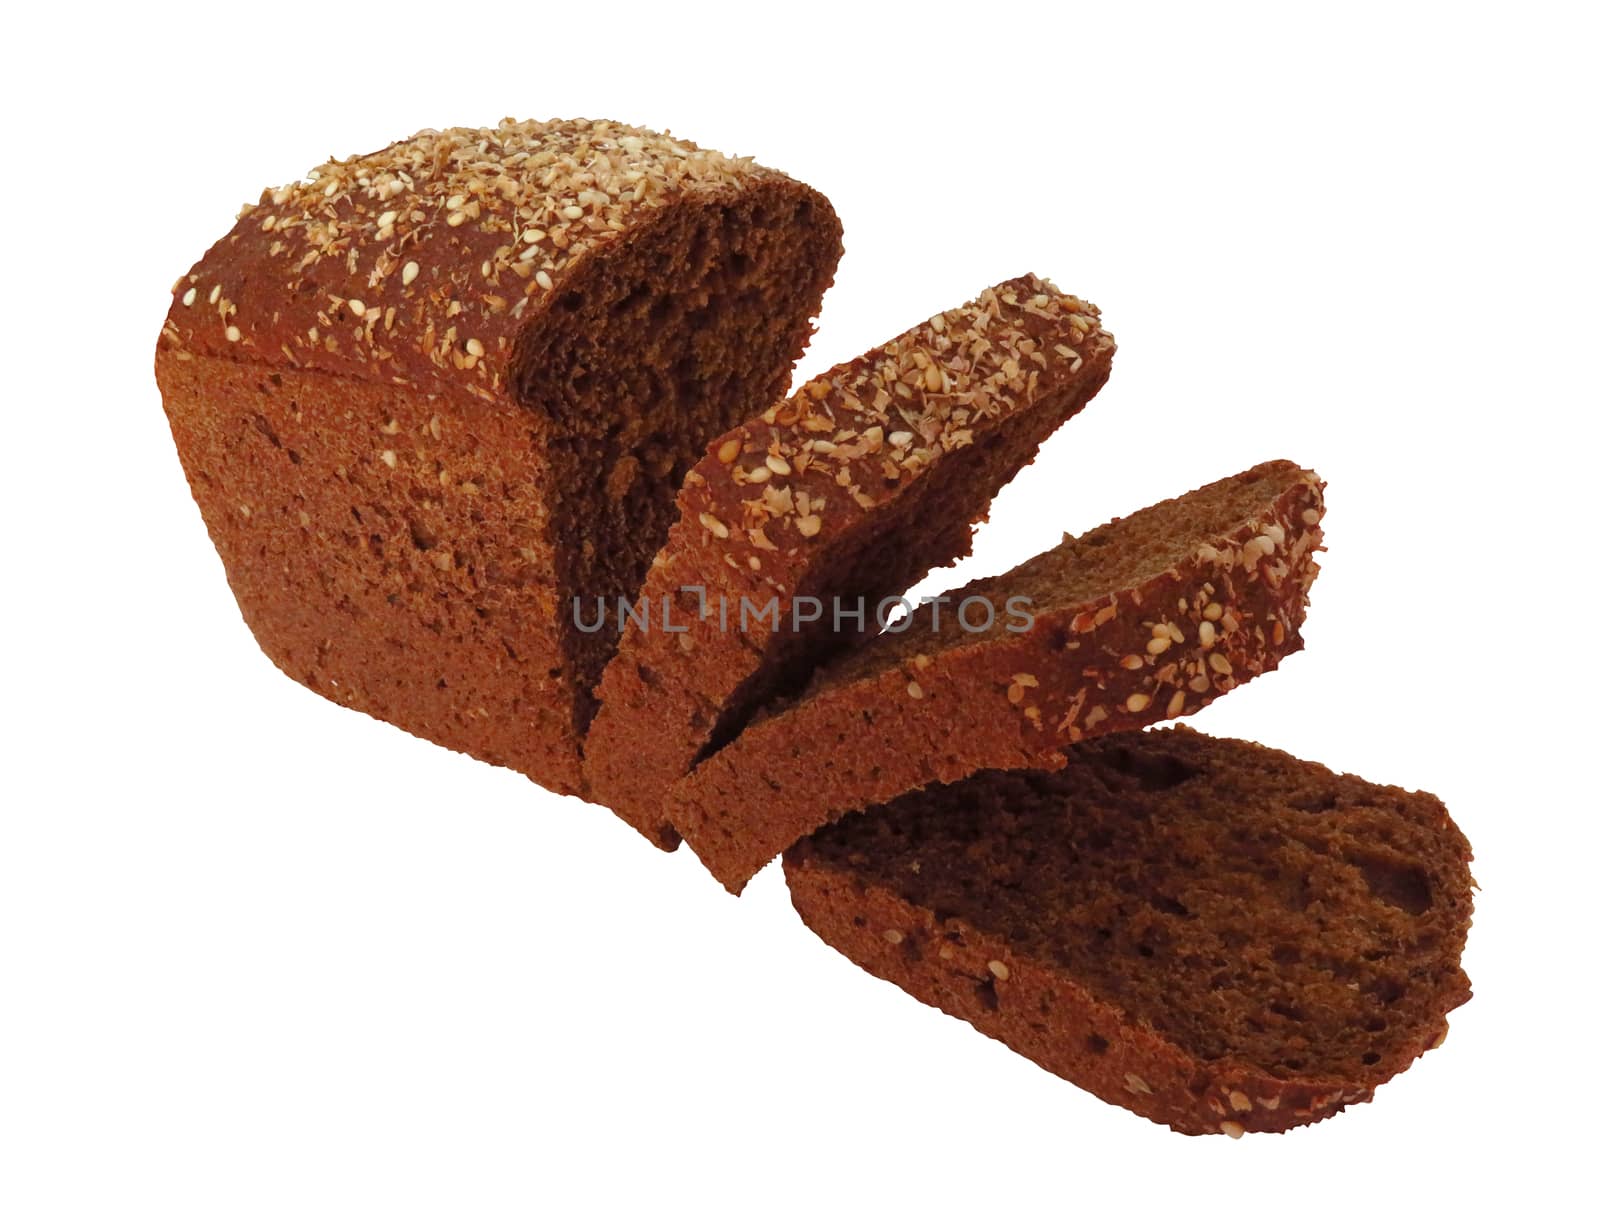 Loaf and slices of rye bread with linseeds and sunflower seeds isolated on white. Clipping Path included.